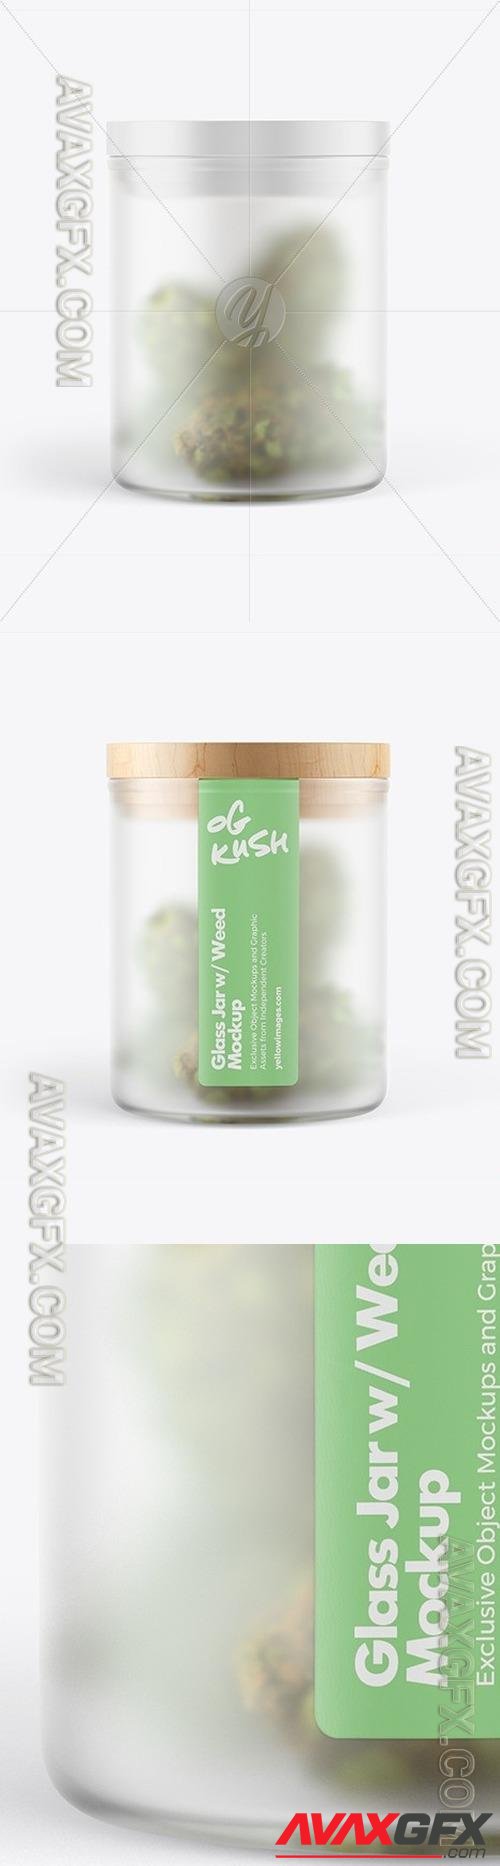 Frosted Glass Jar w/ Weed Buds Mockup 50222 TIF